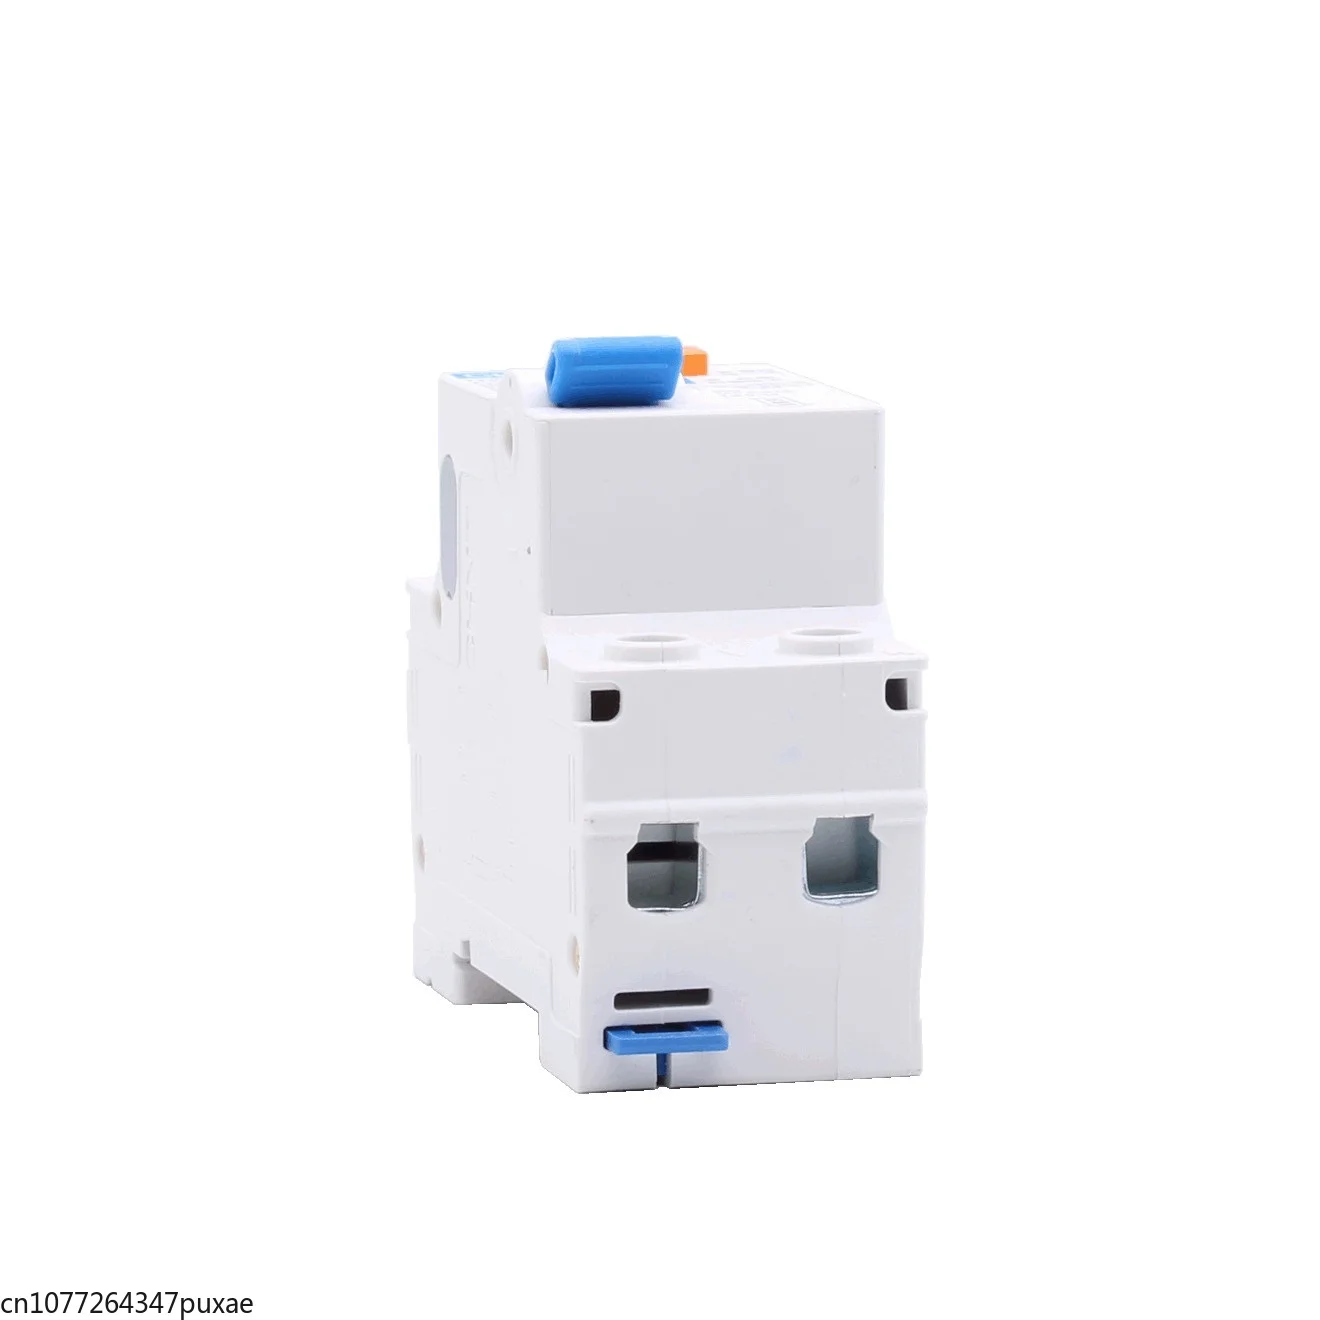 CHINT NXBLE-63Y 6A 10A 16A 32A 63A 10MA 0.01A RCBO 1P+N 230V Residual current Circuit breaker over current Leakage protection